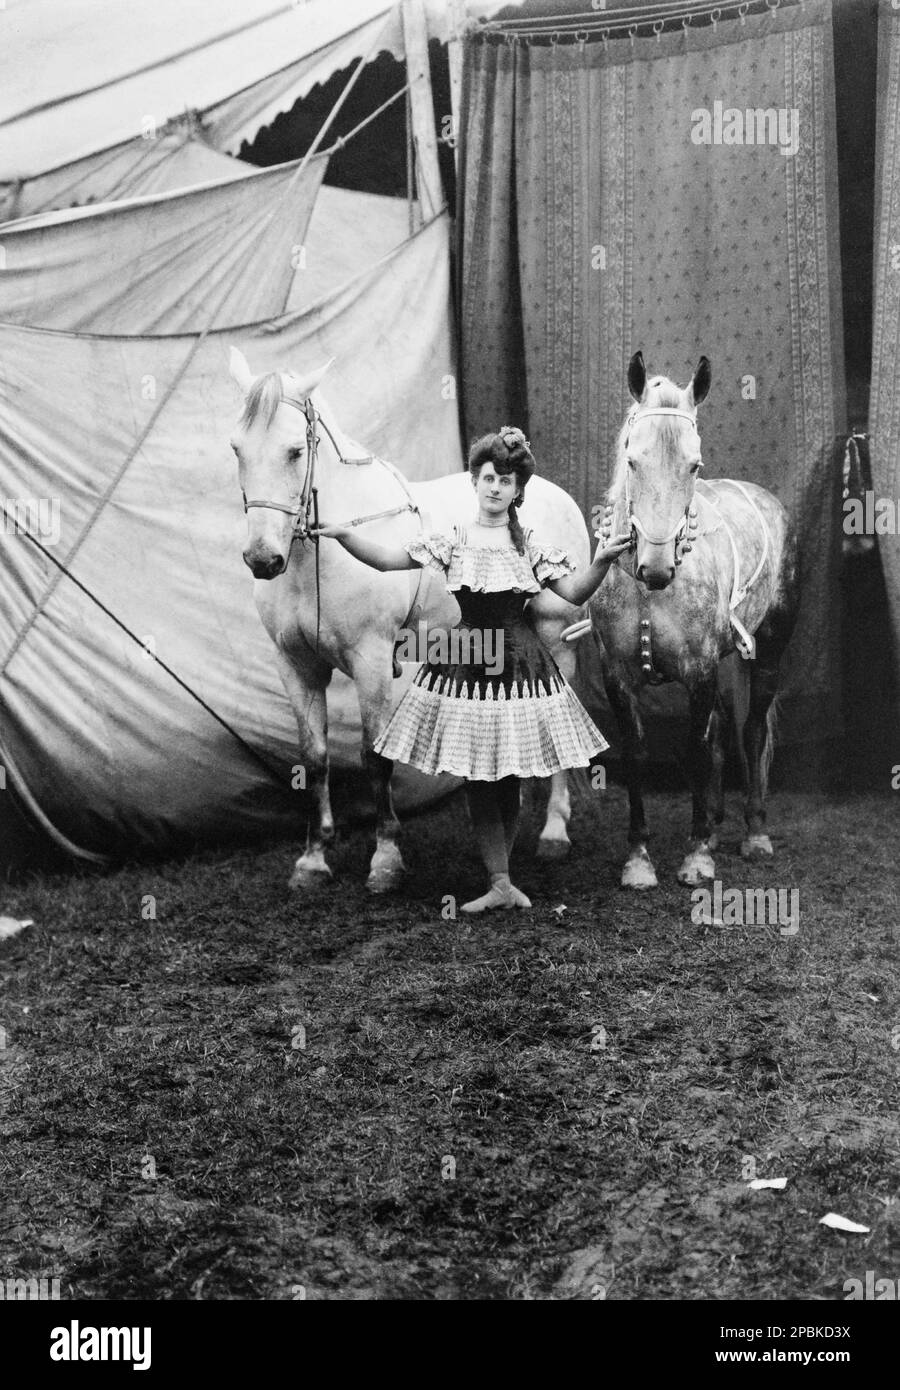 1904 , USA : A Circus girl . Bareback rider standing between two horses outside circus tent .  Photo by unknown - CAVALLO - CAVALLI  - domatore - domatrice equestre - CIRCO - CIRCUS - MUSIC HALL - MUSICALL - CABARET - VAUDEVILLE - WOMAN - DONNA -   HISTORY - FOTO STORICA - CAVALLERIZZA  ----  Archivio GBB Stock Photo